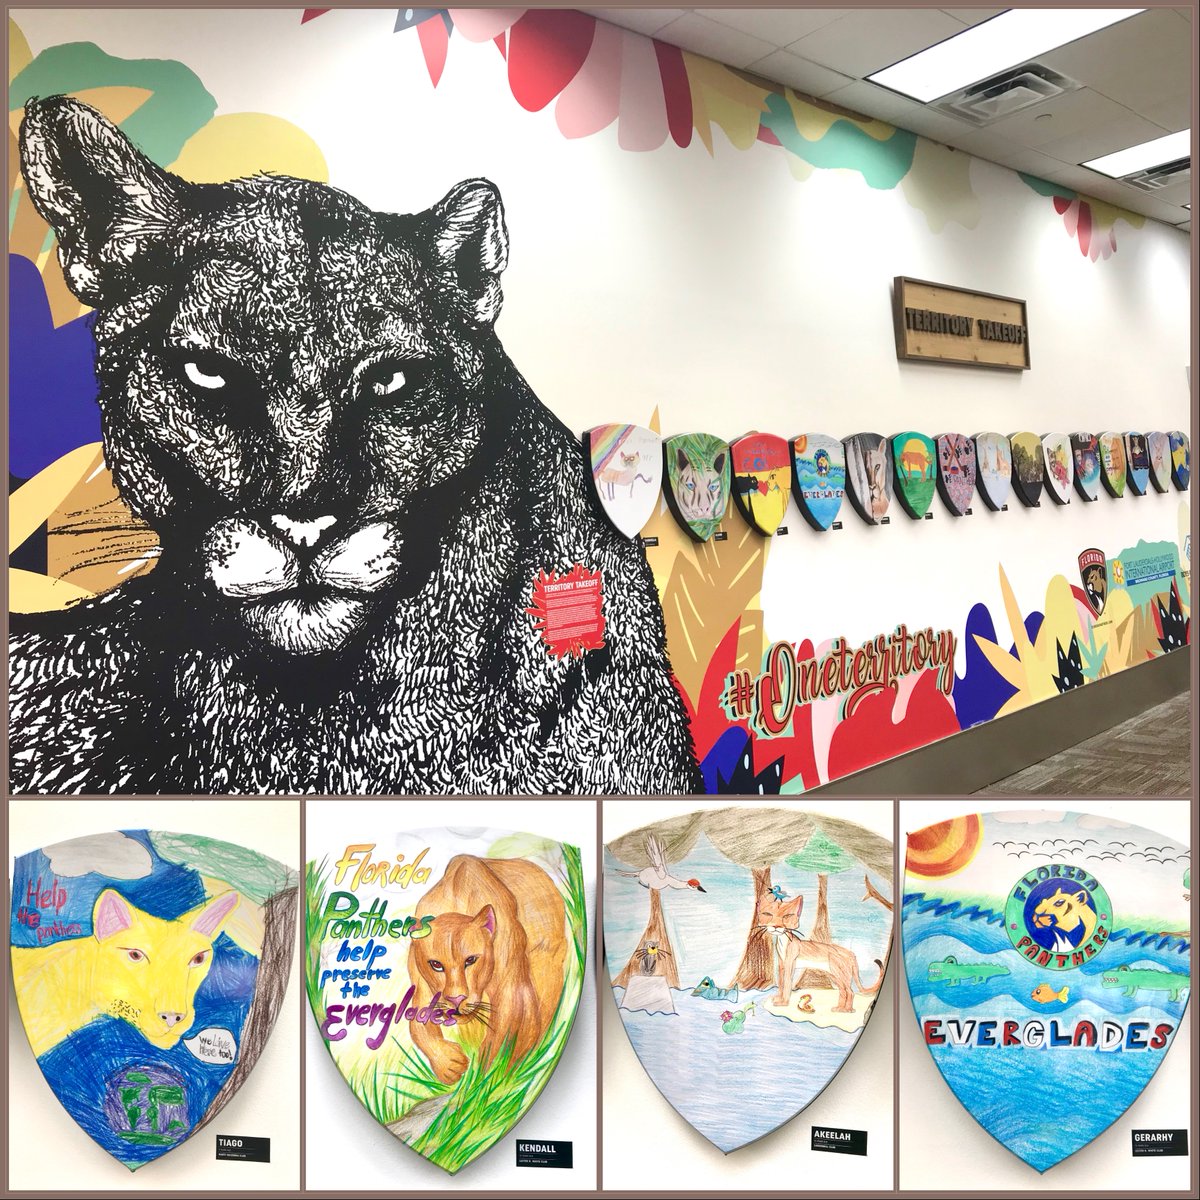 When travelers arrive at the Fort Lauderdale Airport they are greeted with this magnificent display of Civic Leadership by our @BGCofBroward artists! Save the Panther, Save the Everglades. Thank you all! @evergfoundation @FoEverglades @nature_org @CenterForBioDiv